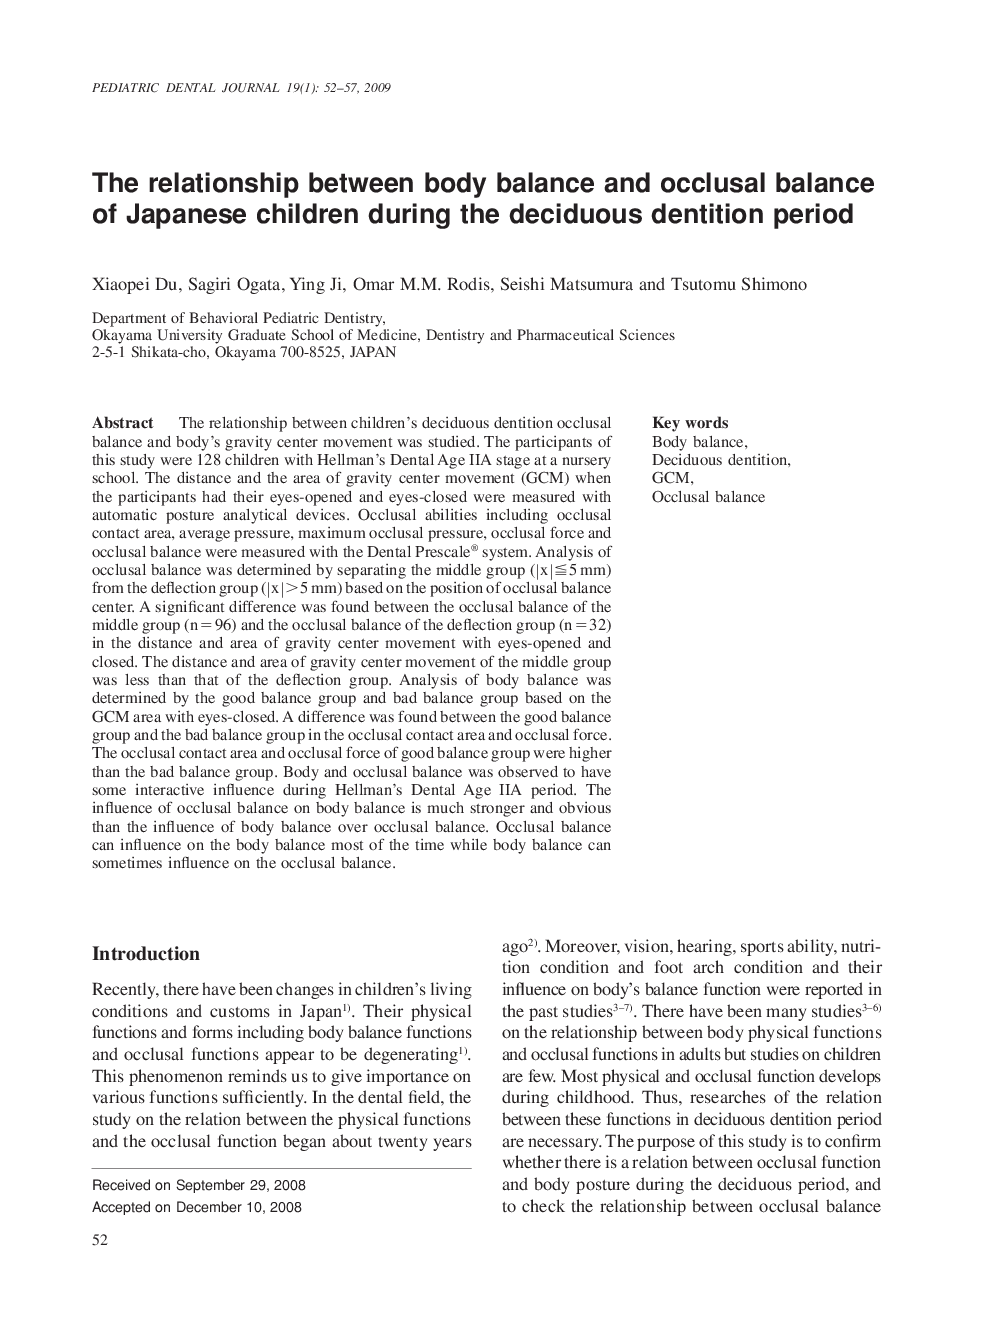 The relationship between body balance and occlusal balance of Japanese children during the deciduous dentition period